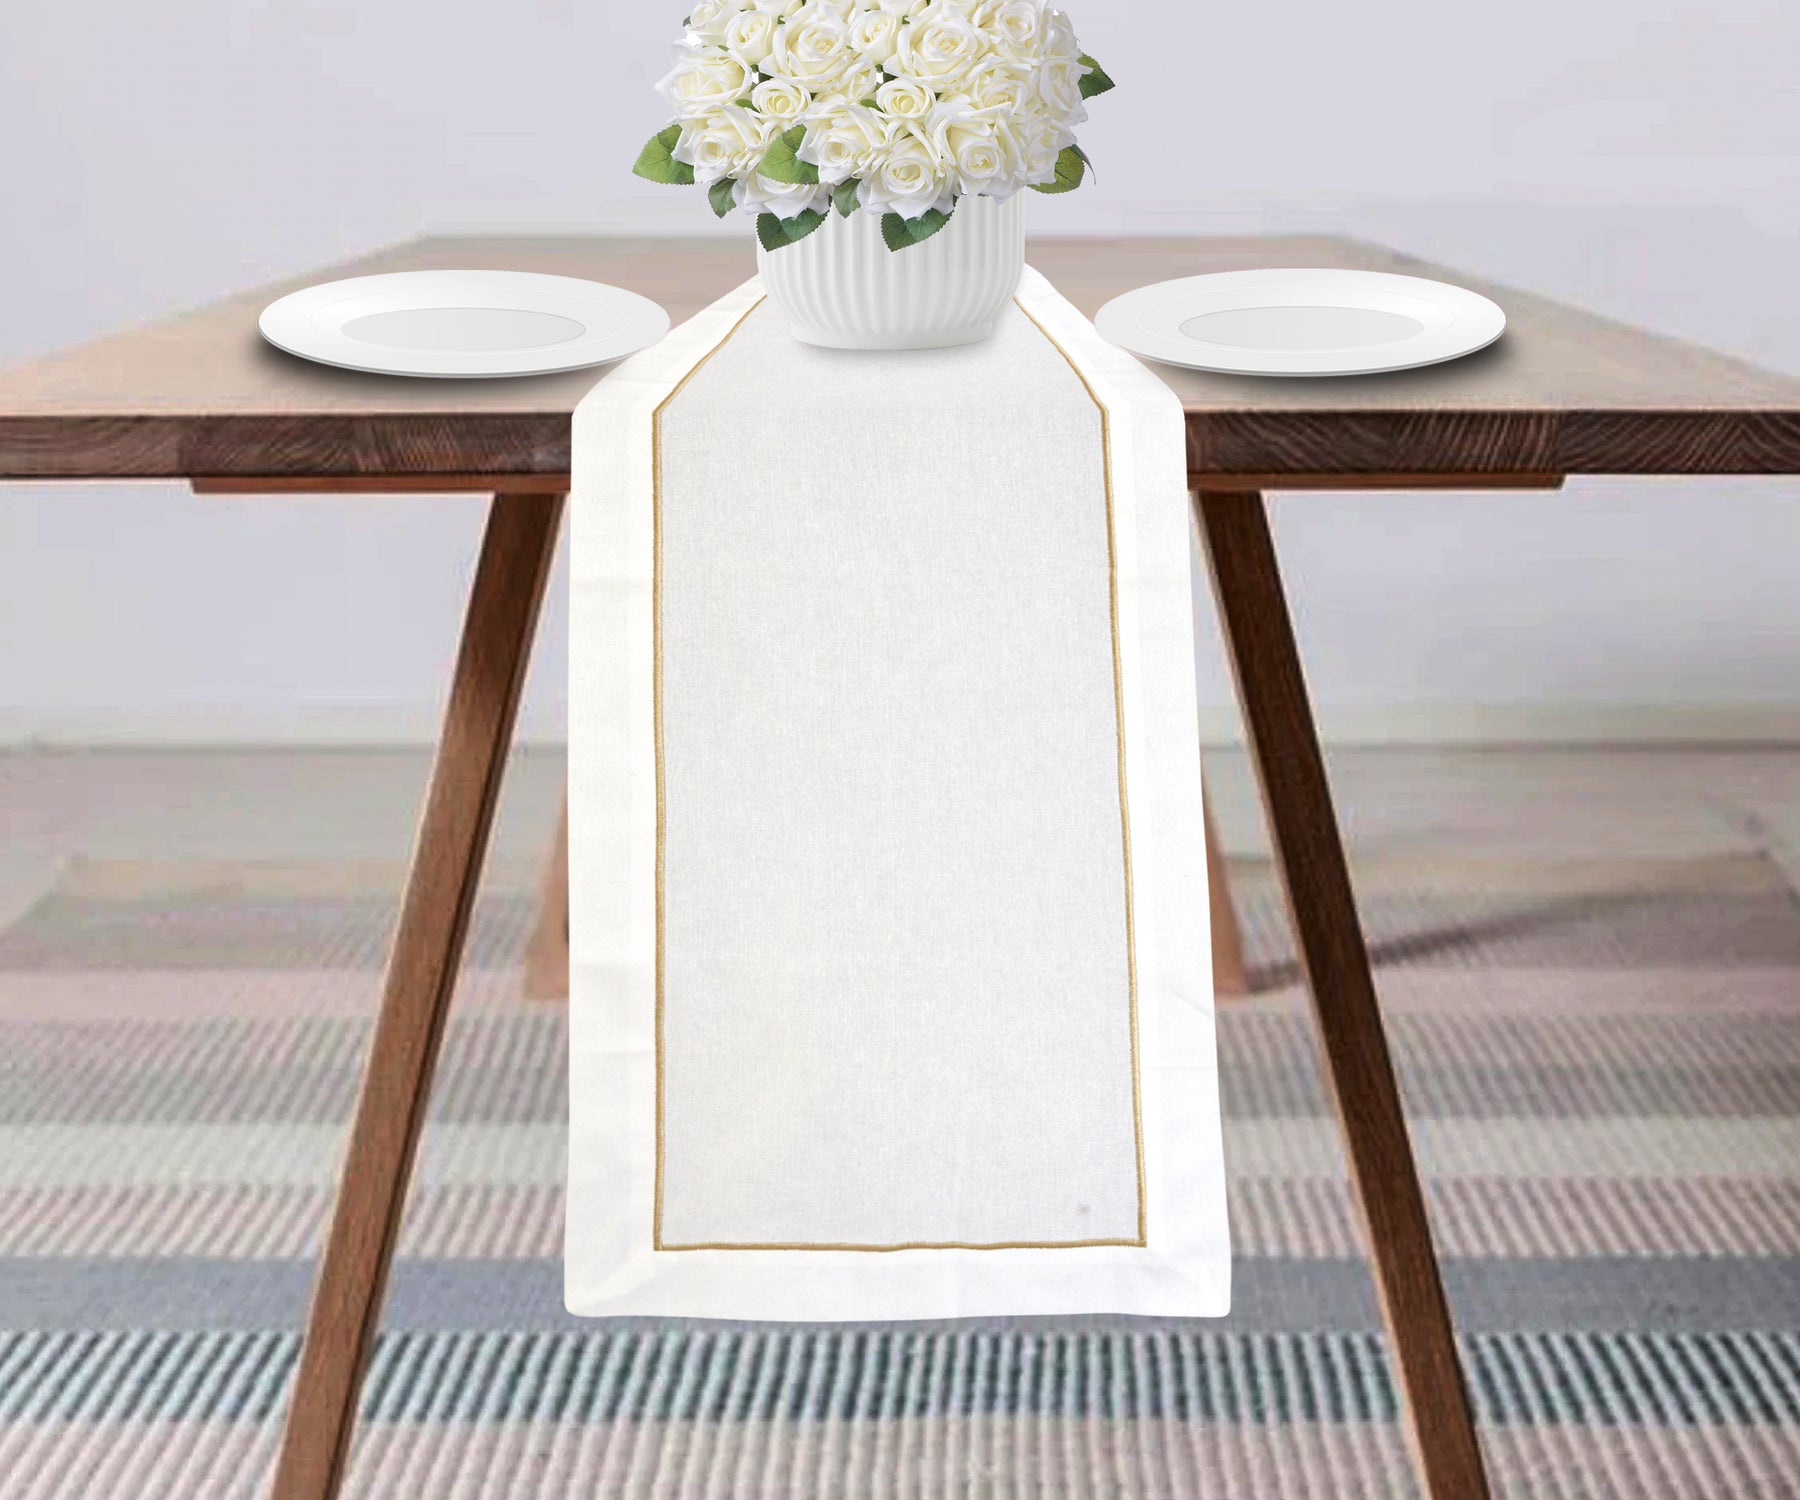 white table runner is designed  which seats up to 6 to 8 heads comfortably, beige table runner.